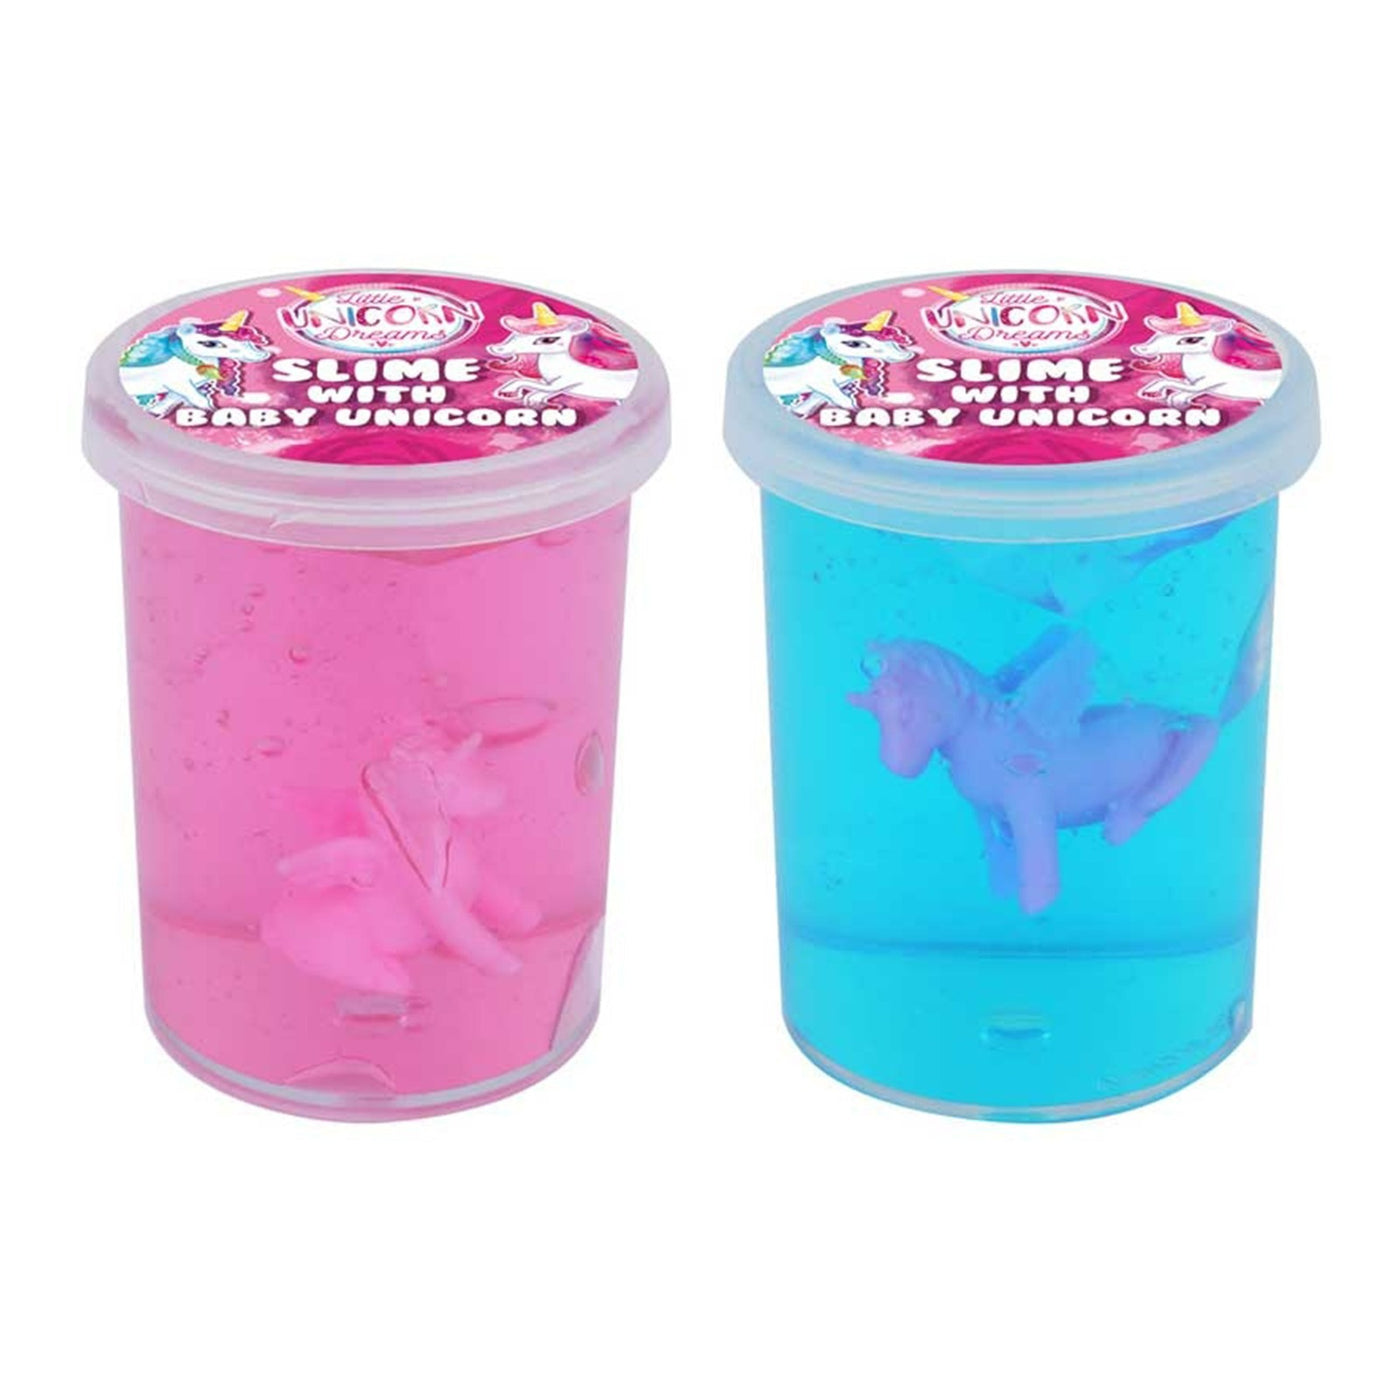 Pre Filled Unicorn Slime Birthday Party Goody Bags, Party Favours In Gift Bags For Girls With Toys And Candy.